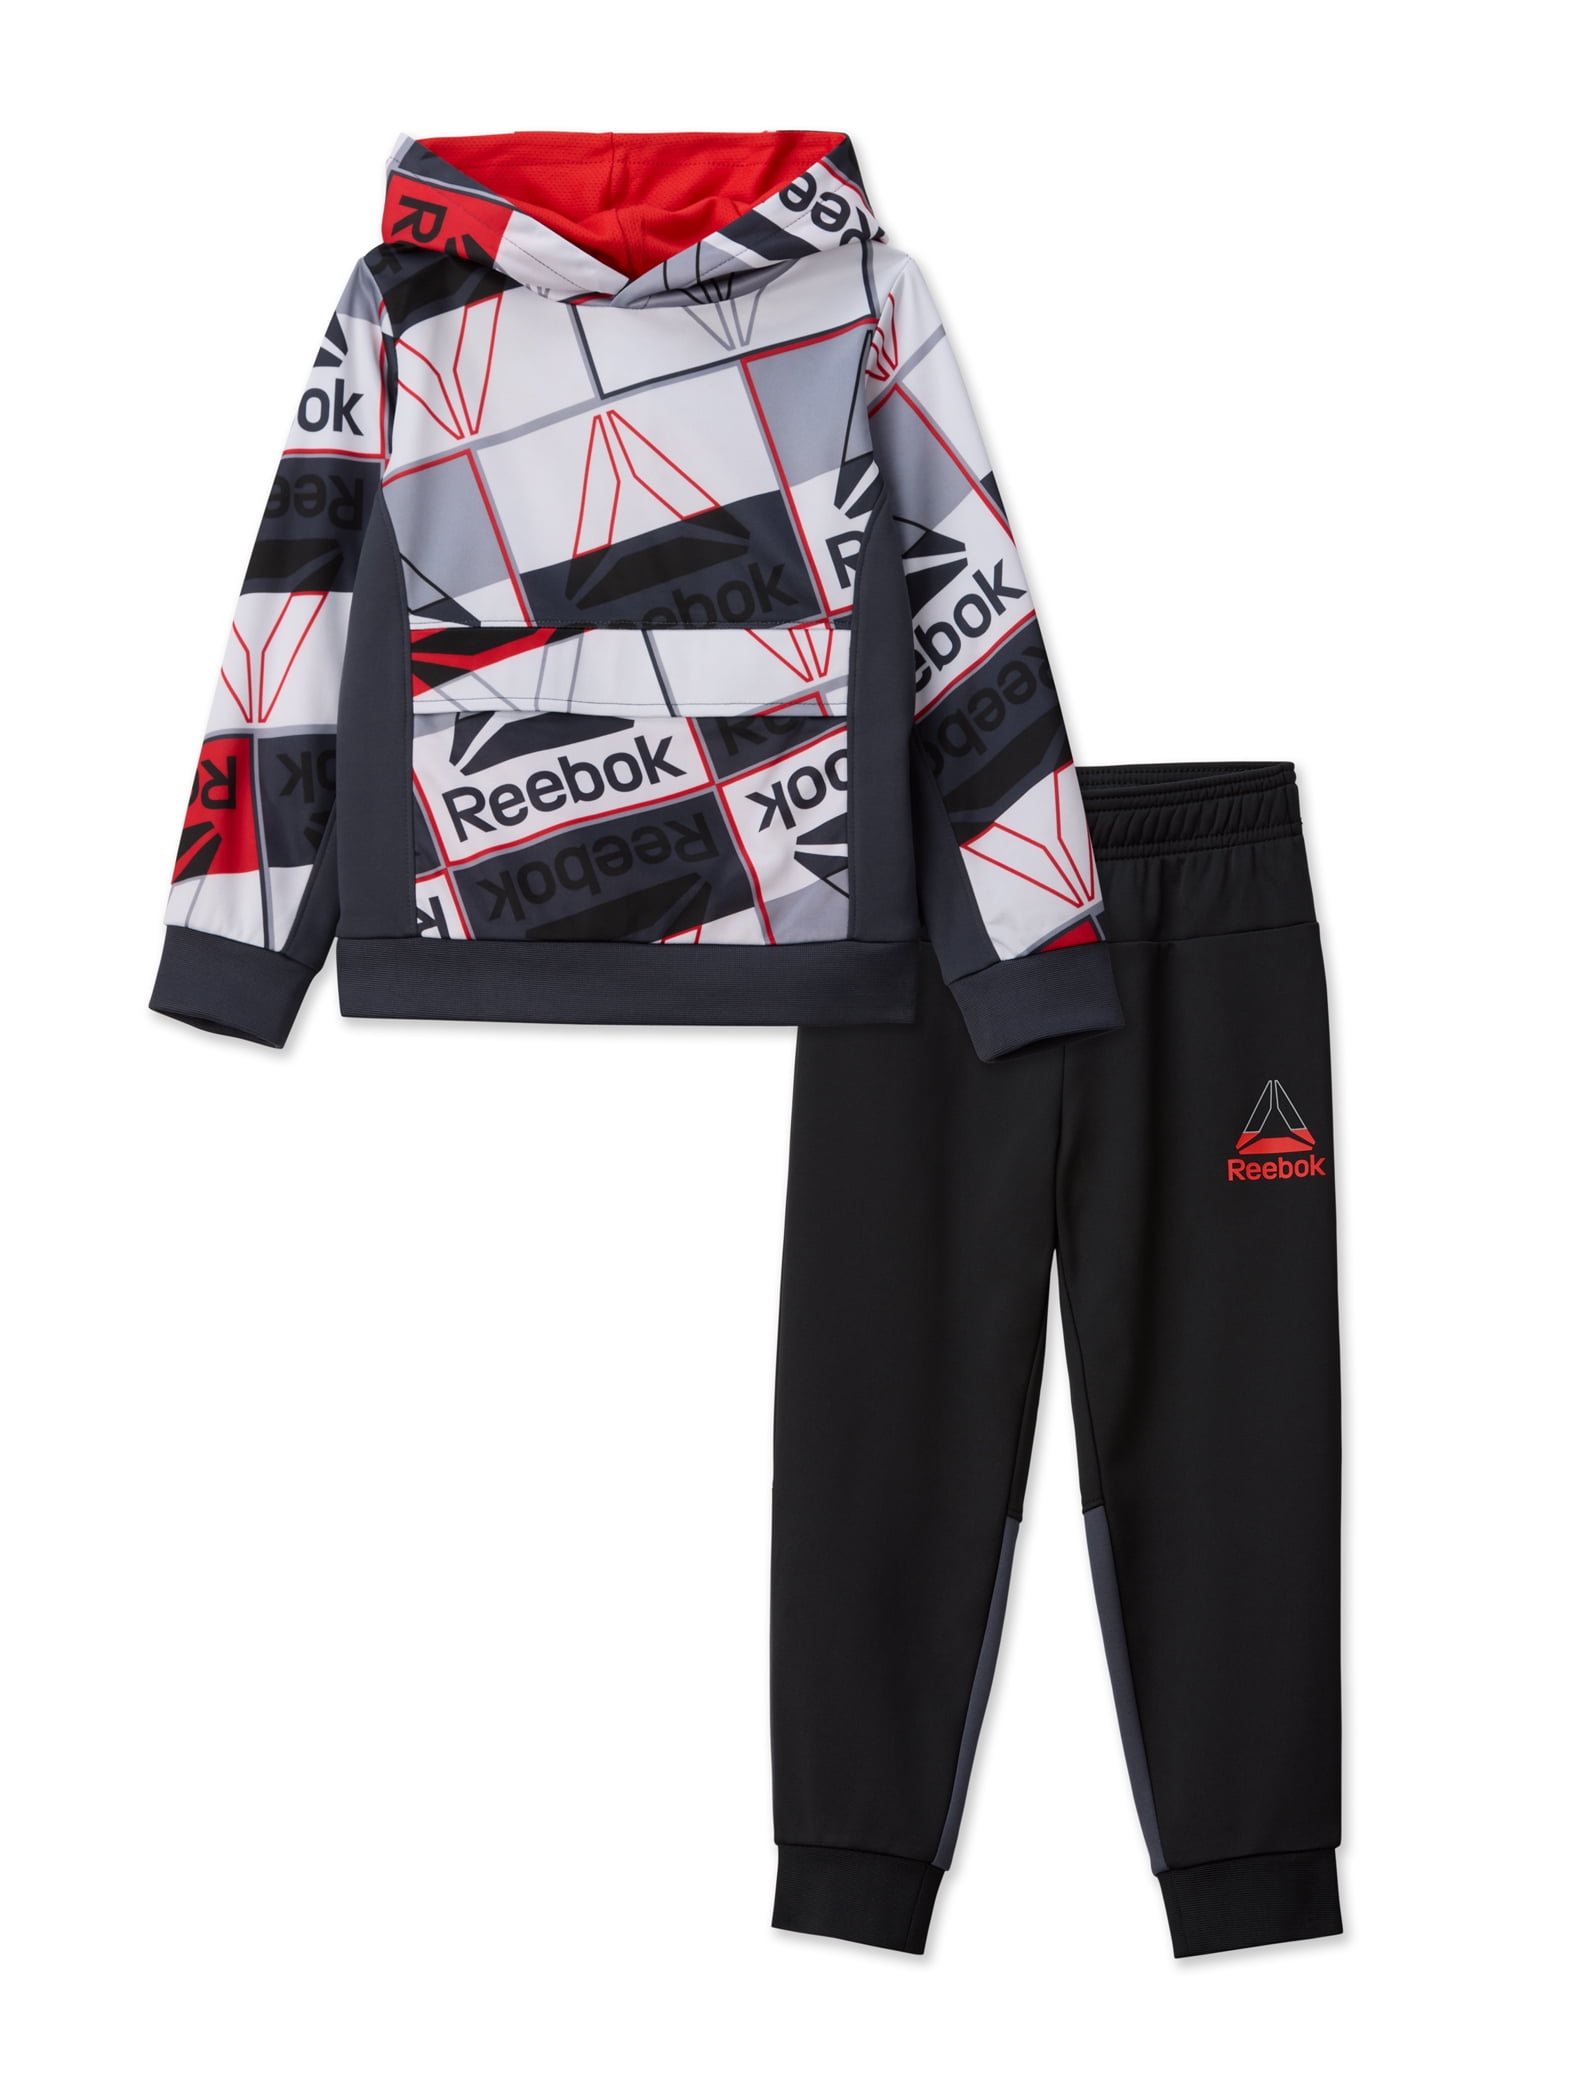 Reebok Baby and Toddler Boy Guard Printed Zip Hoodie and Jogger